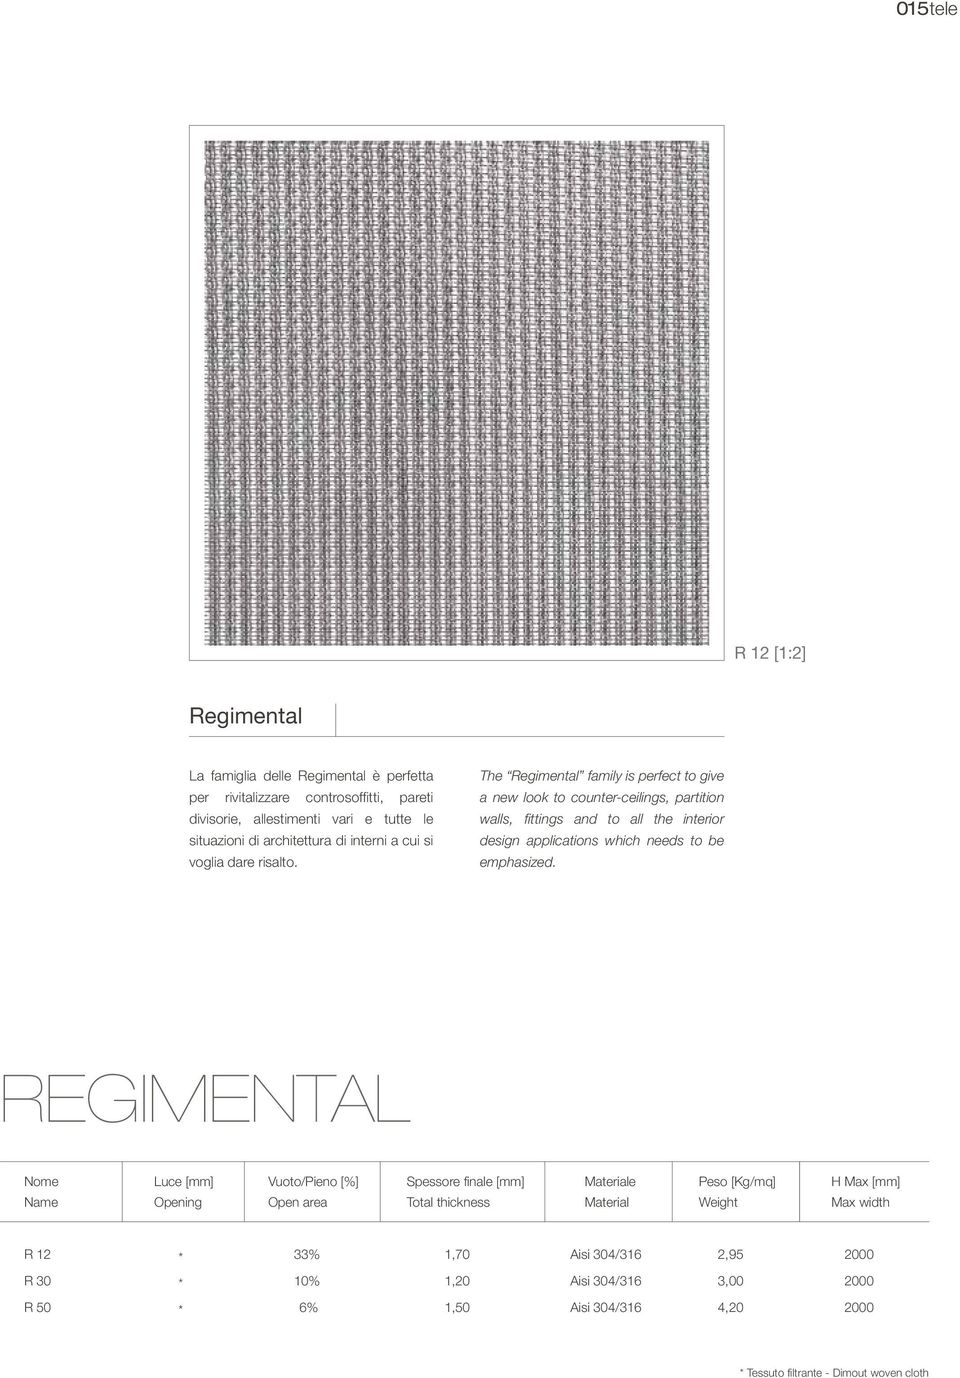 The Regimental family is perfect to give a new look to counter-ceilings, partition walls, fittings and to all the interior design applications which needs to be emphasized.